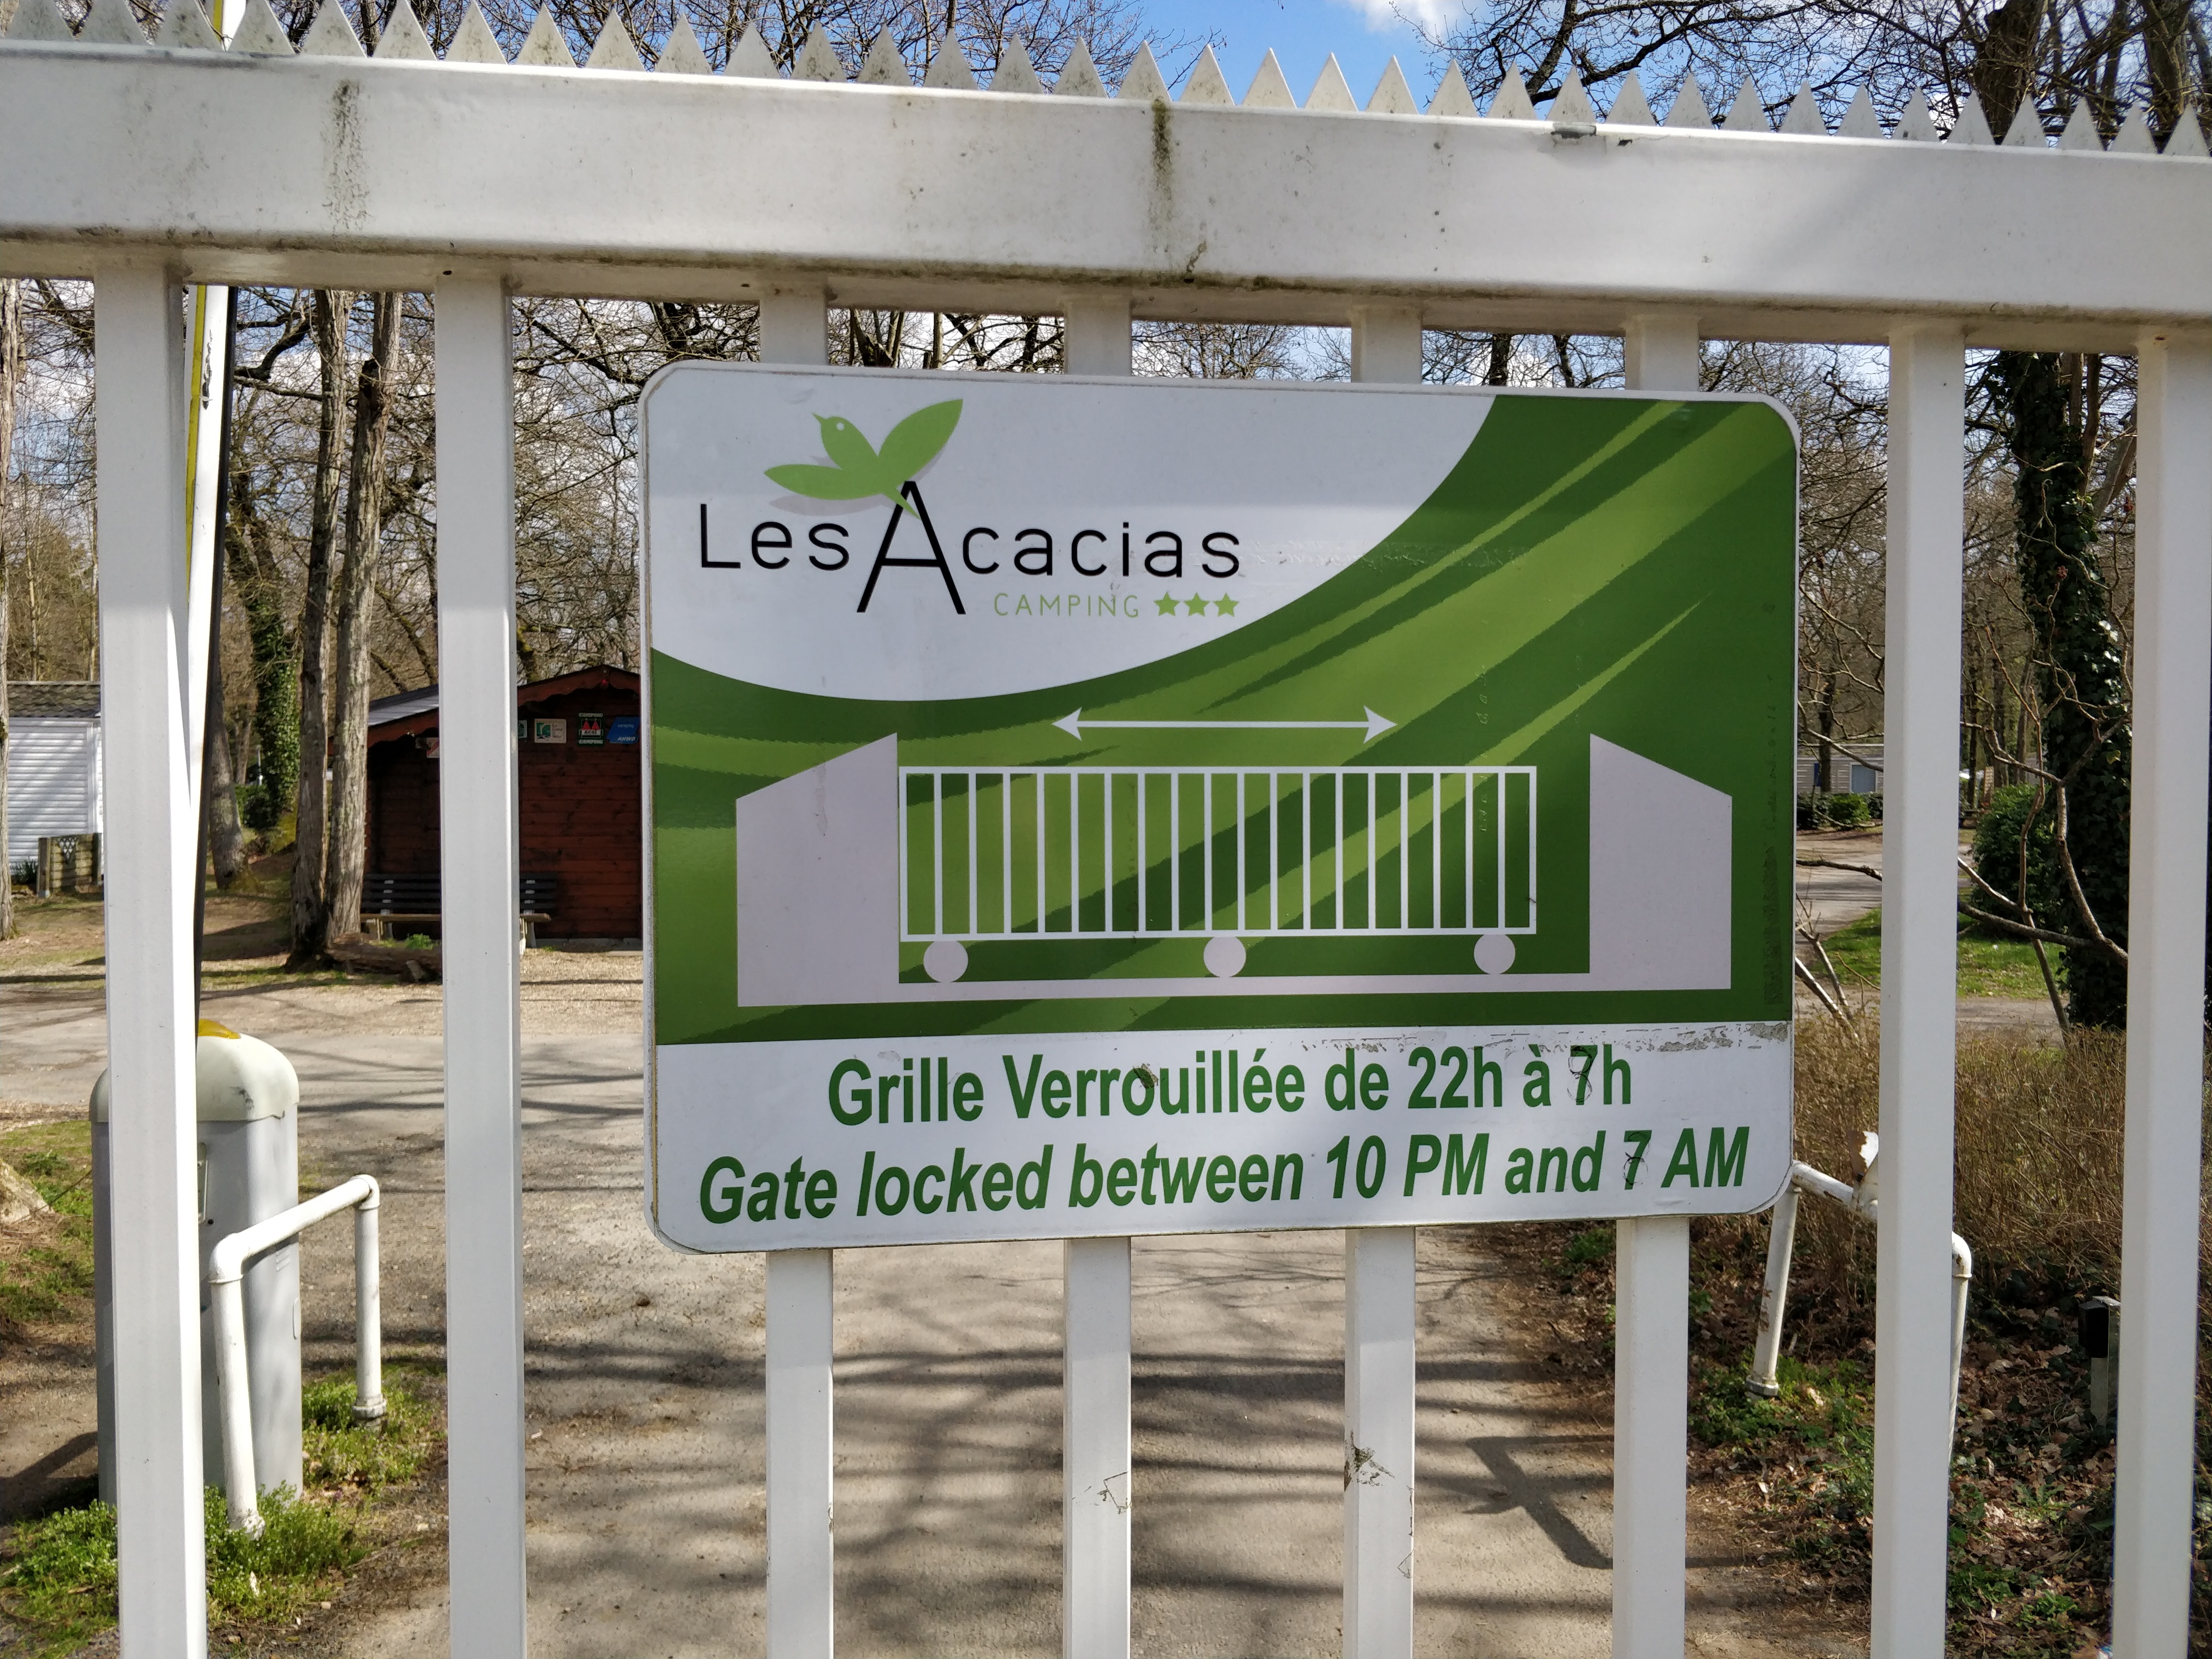 Gate access information-Les Acacias Camping, Loire Valley, France